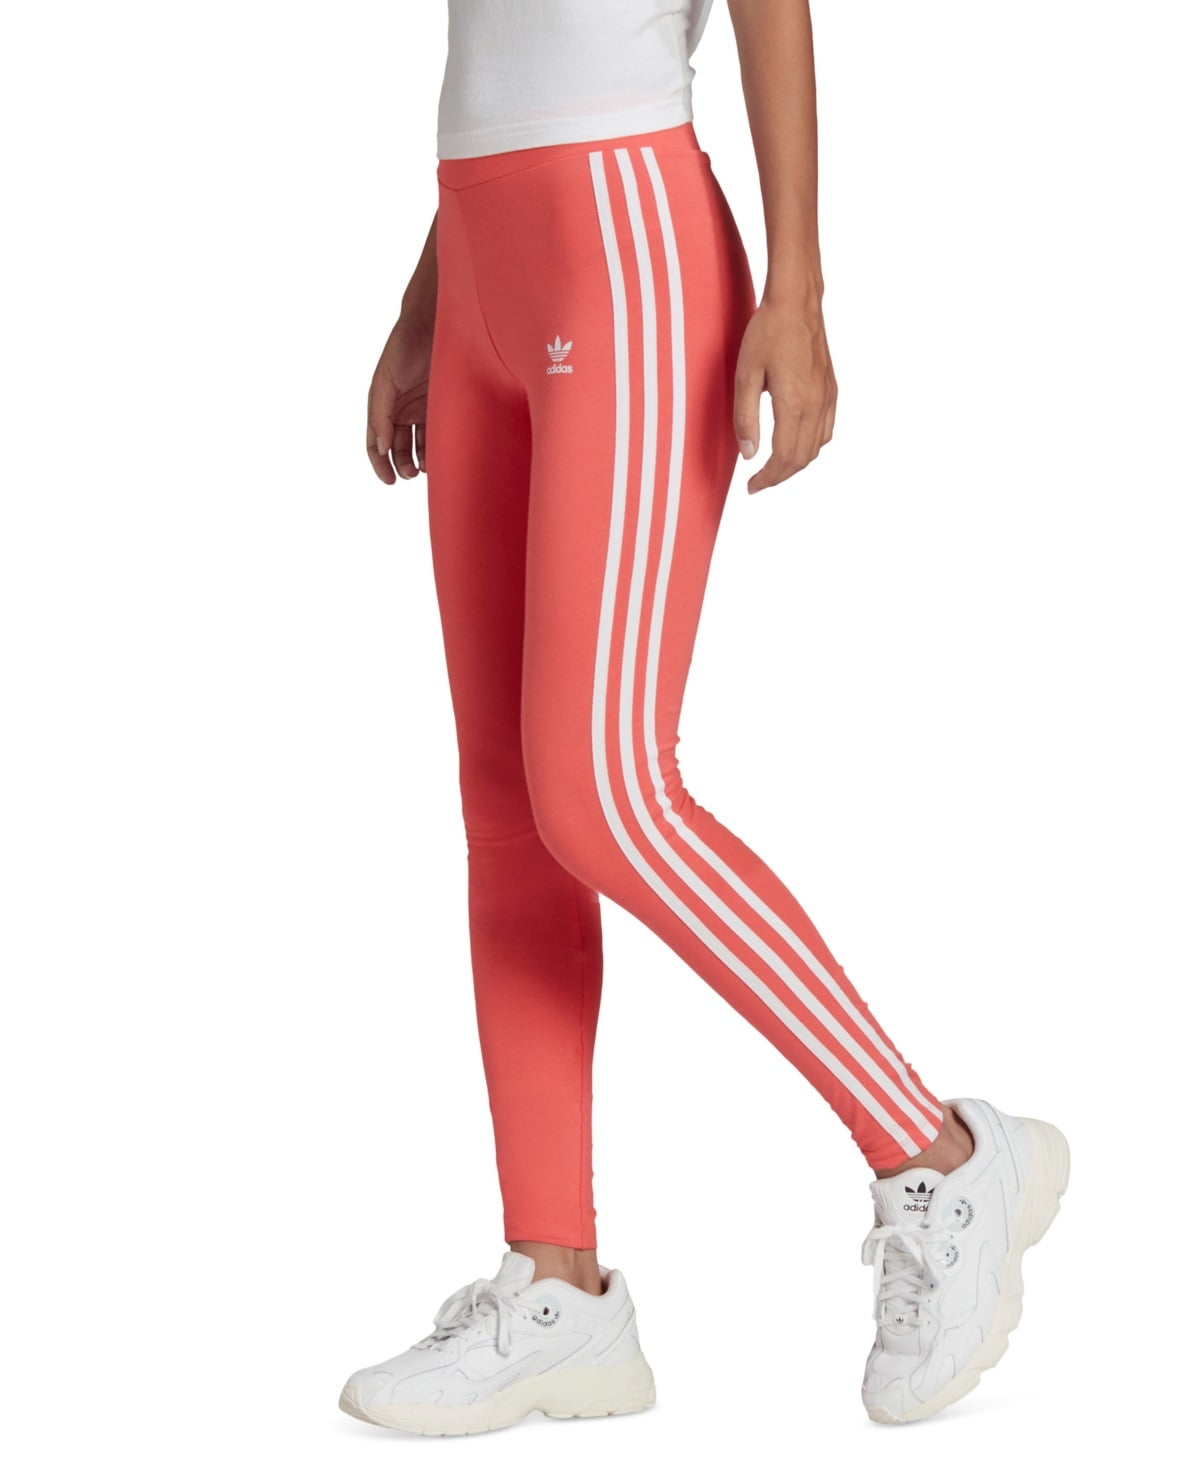 adidas Women's Classic 3 Stripes Tights Red Size X-Small 